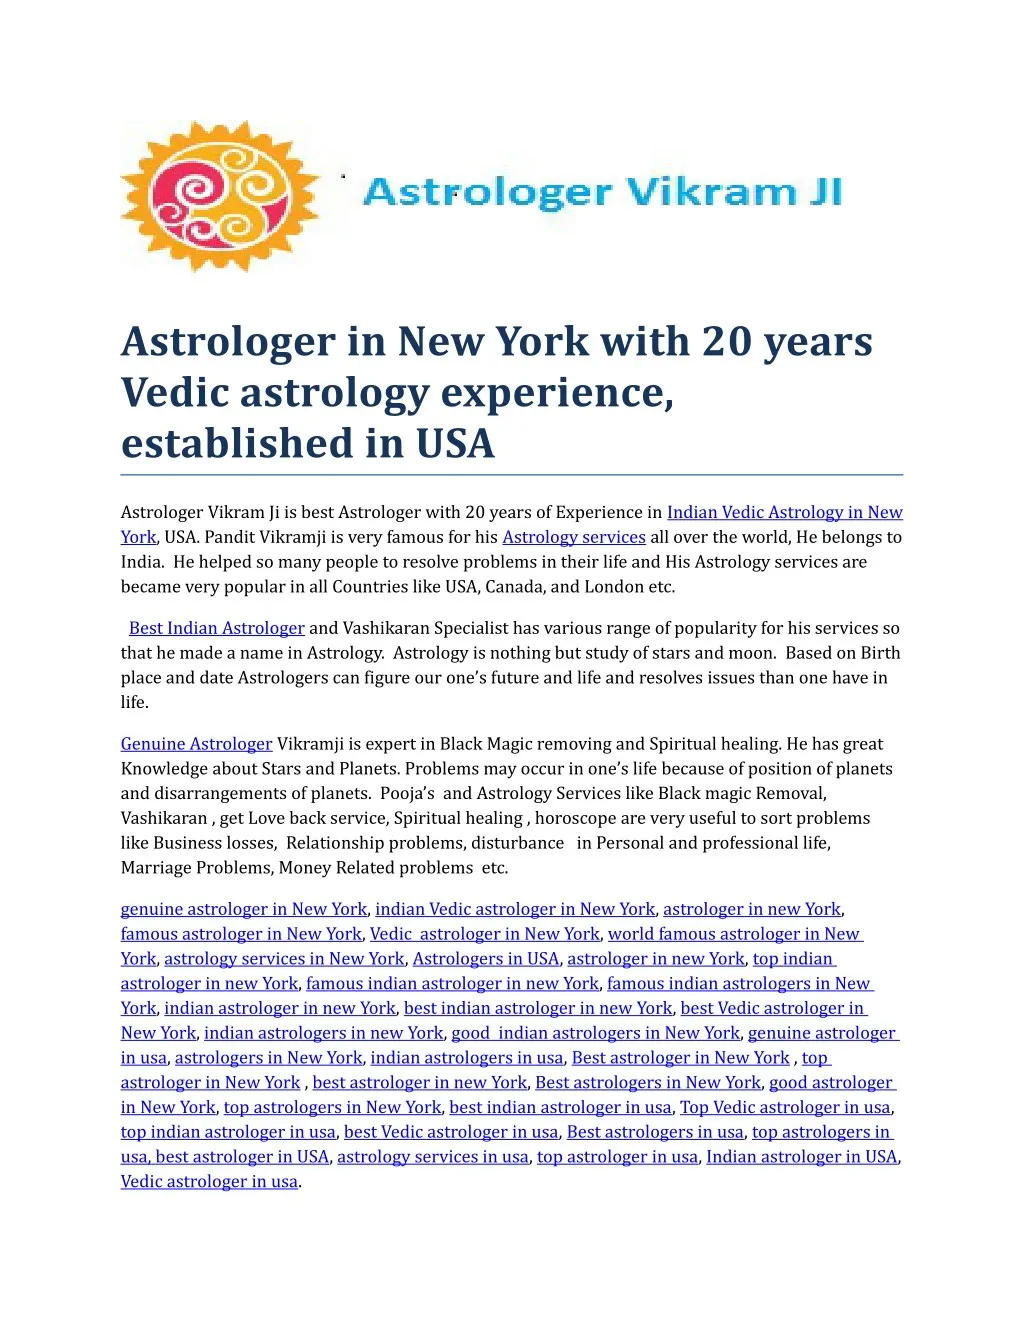 astrologer in new york with 20 years vedic